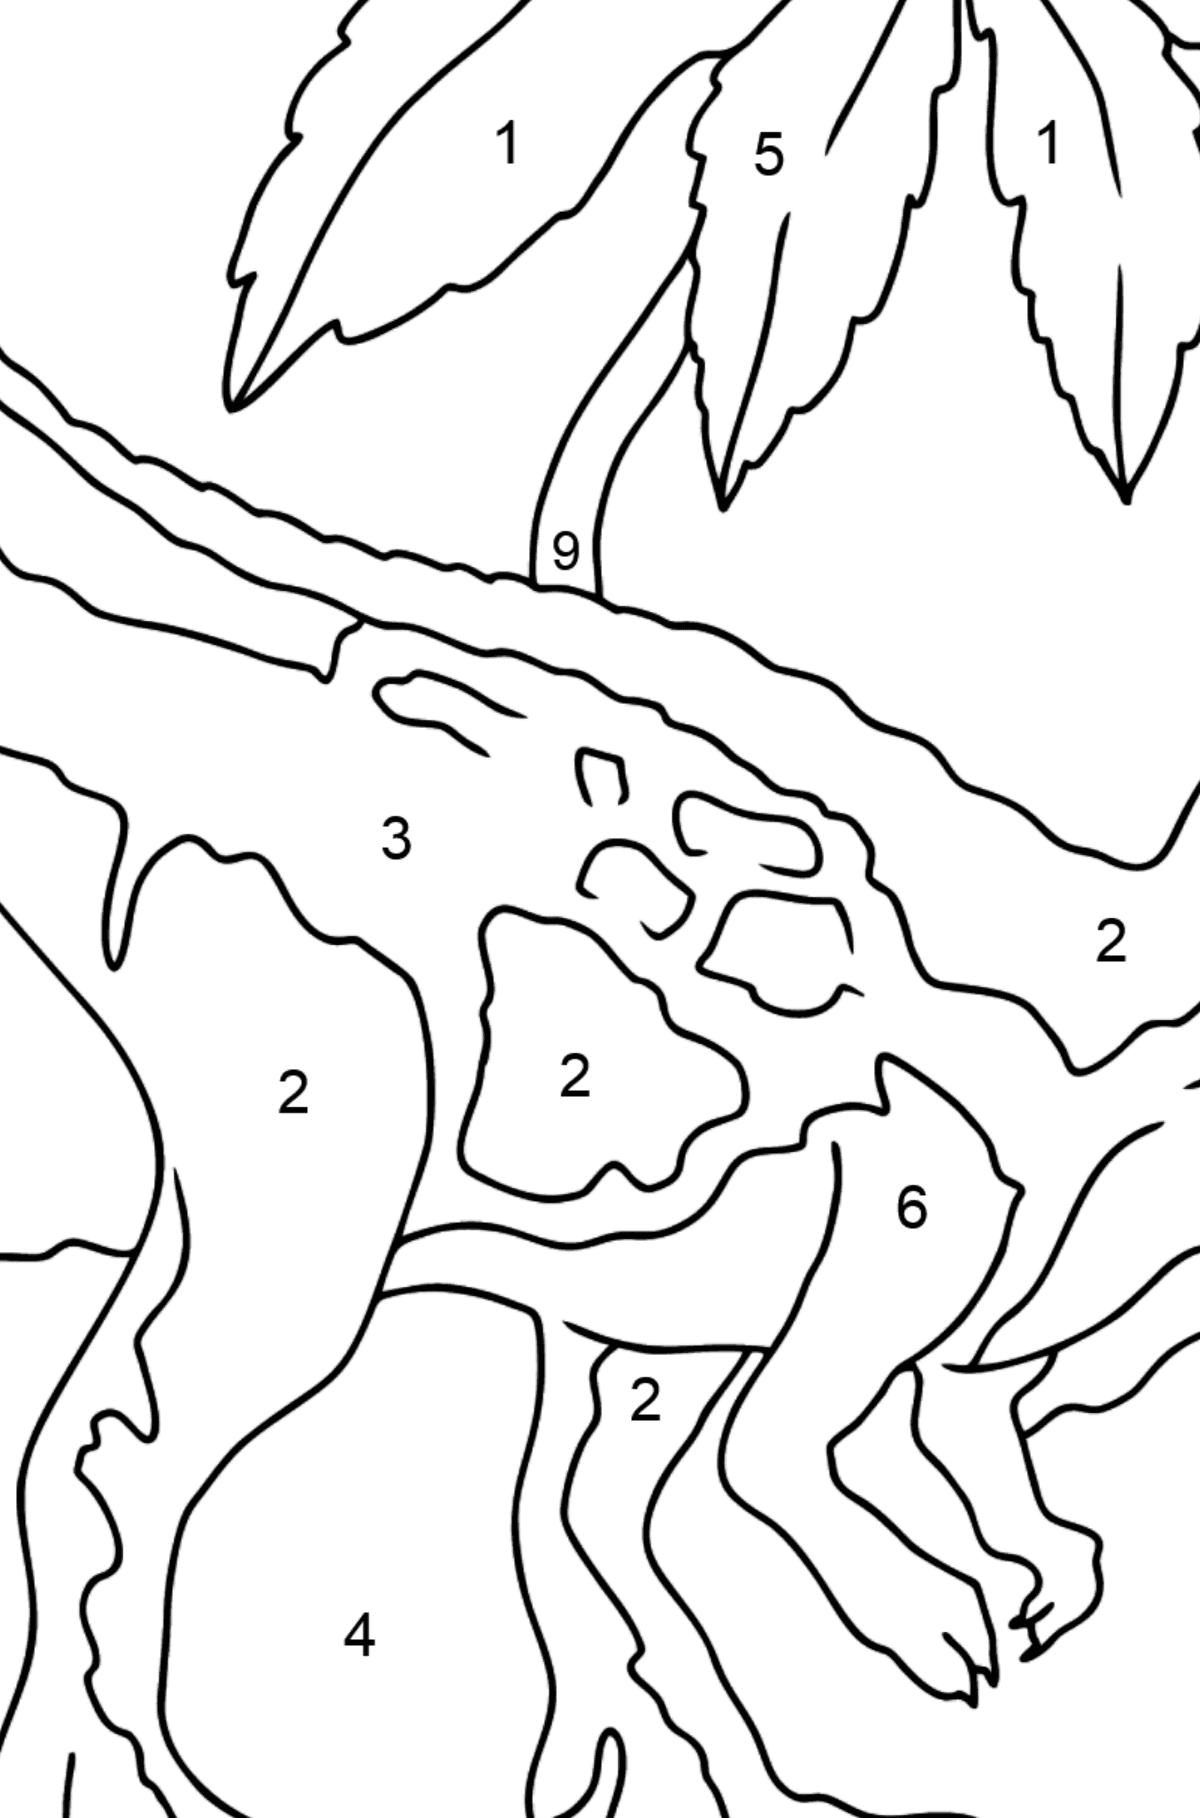 Coloring Page - Tyrannosaurus - A Terrestrial Predator - Coloring by Numbers for Kids